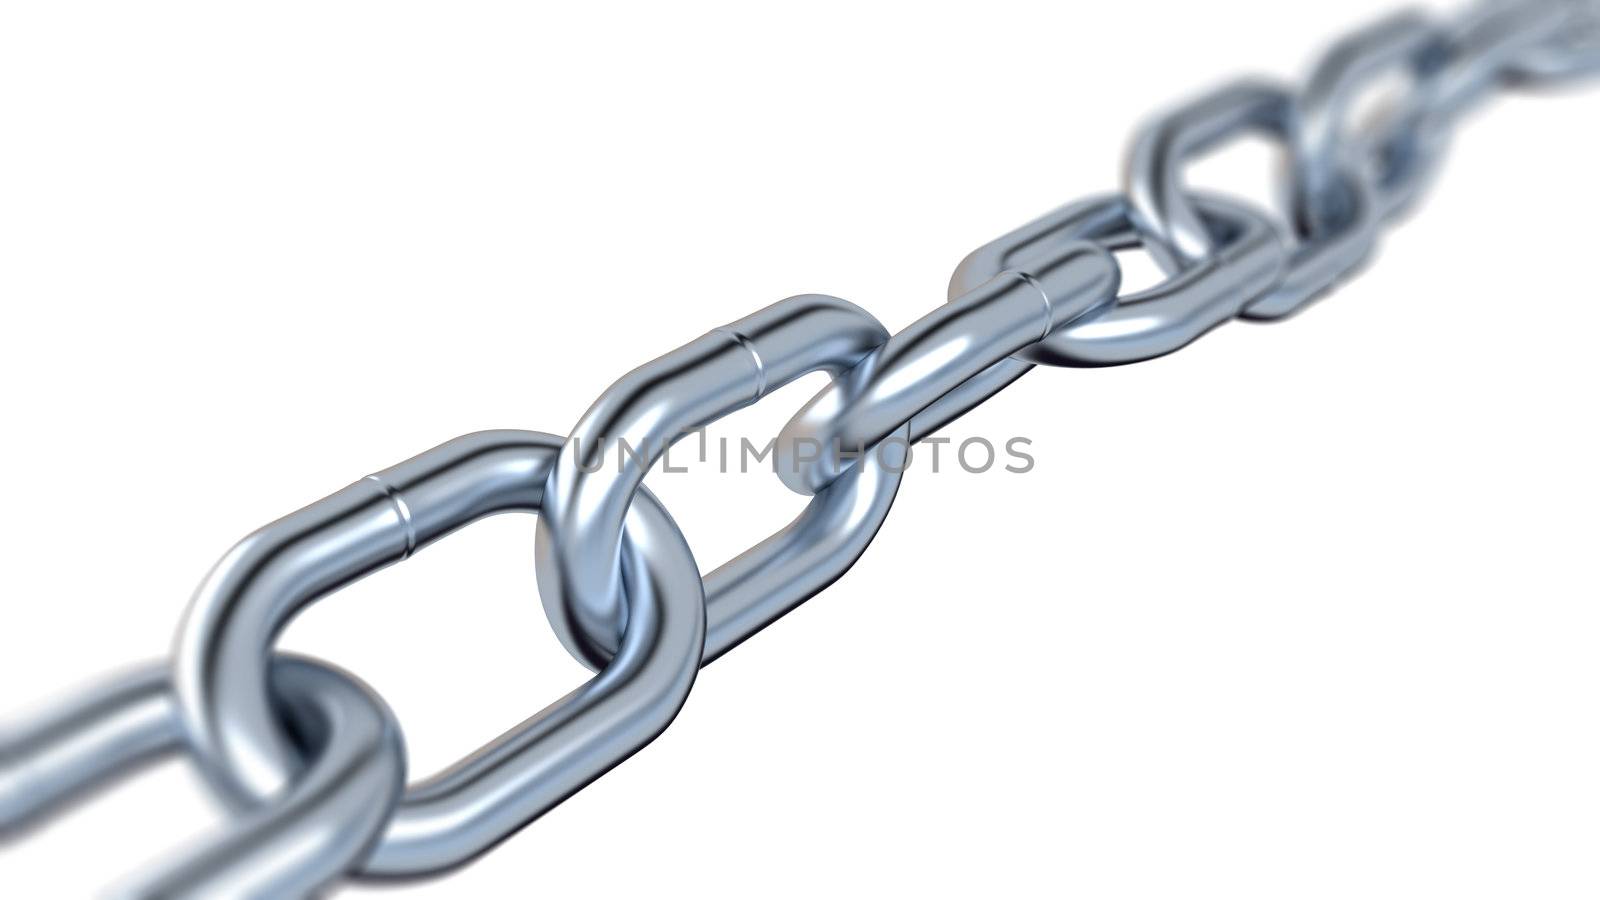 Blurred Metallic Chain with a White Background